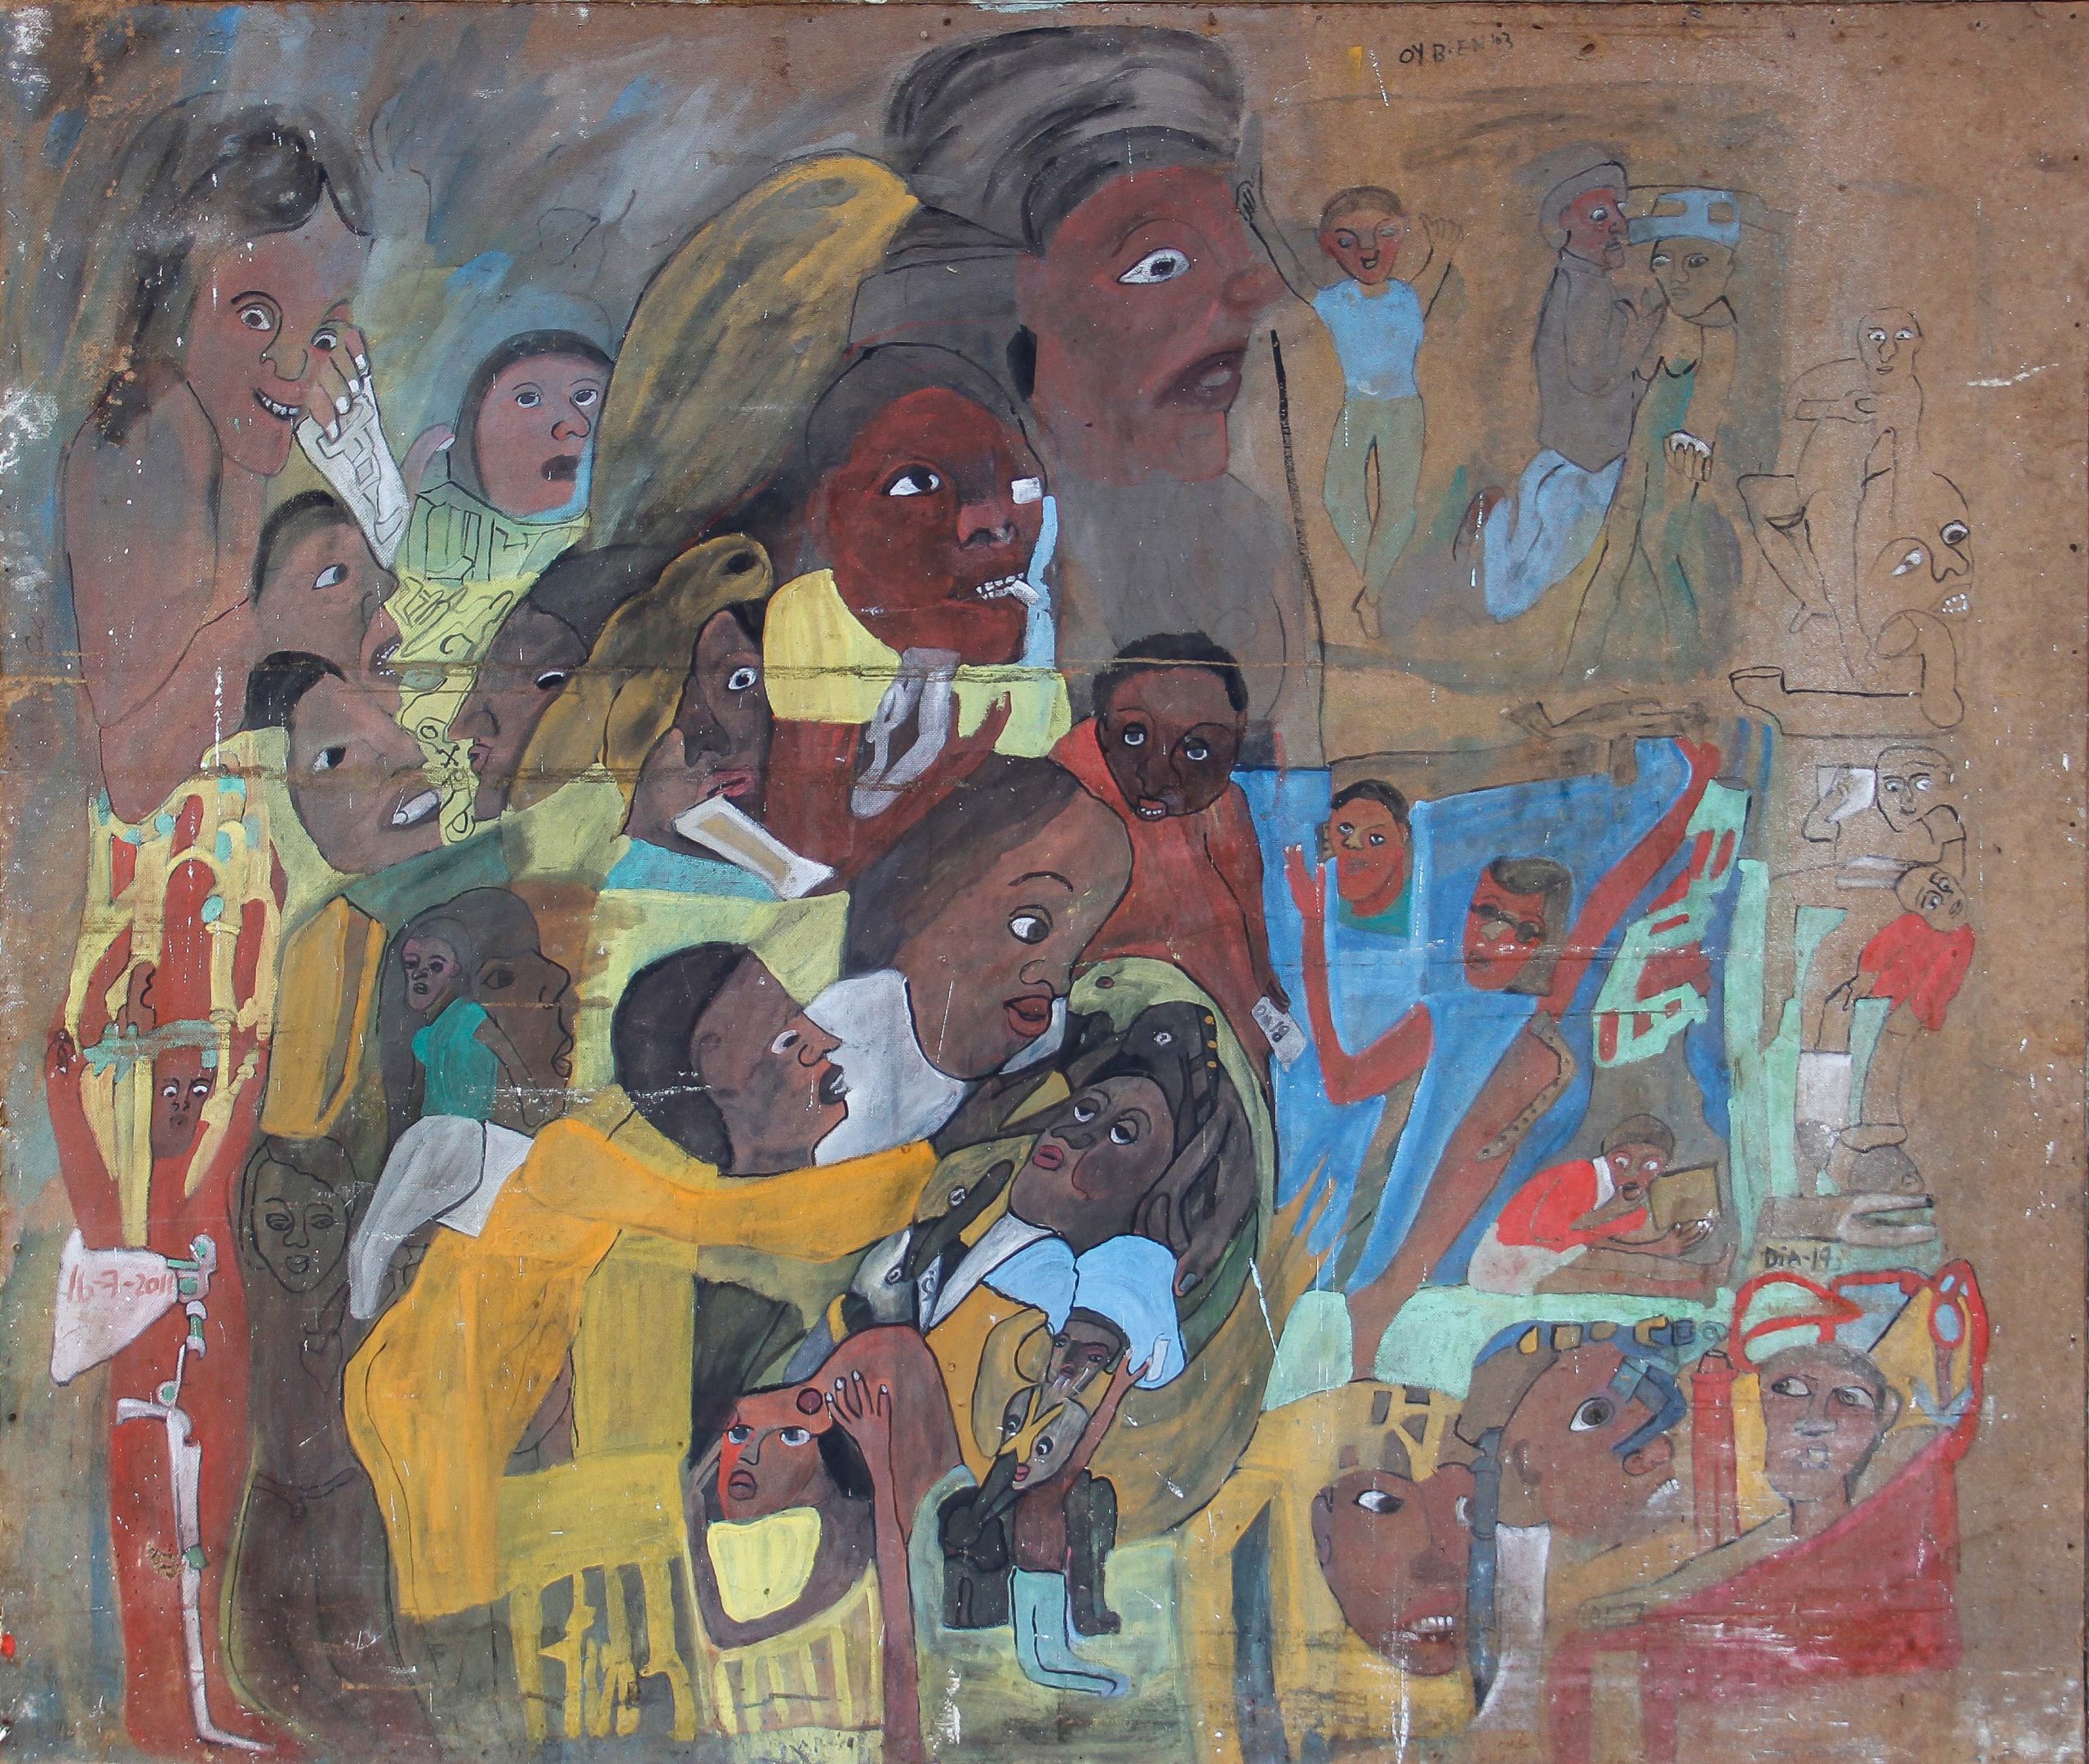 This is an untitled painting by Cuban artist Esperanza Conde Rodriguez that has been used as the cover of this years Afield Study Program. It is an image of a surreal and abstract painting with over 20 faces with brown and reddish skin tones. The faces and bodies emerge out of one another in a surreal way and are mostly looking towards the right side of the painting. The characters in the painting are wearing mostly bright yellow, sky blue and aqua green. The general tone of the painting is dark brown and red.